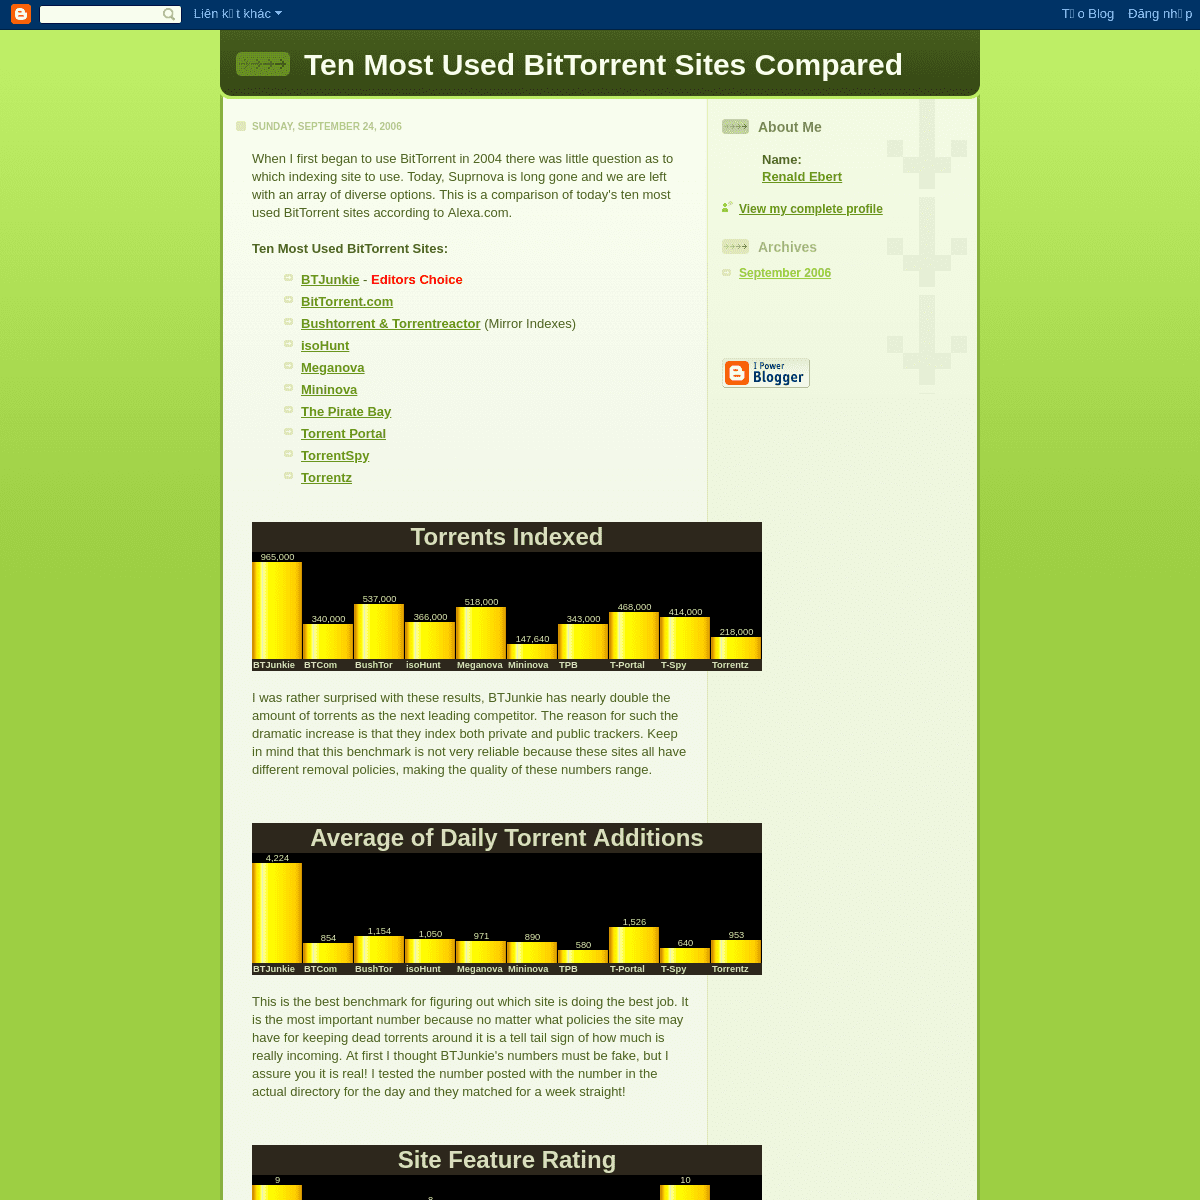 Ten Most Used BitTorrent Sites Compared